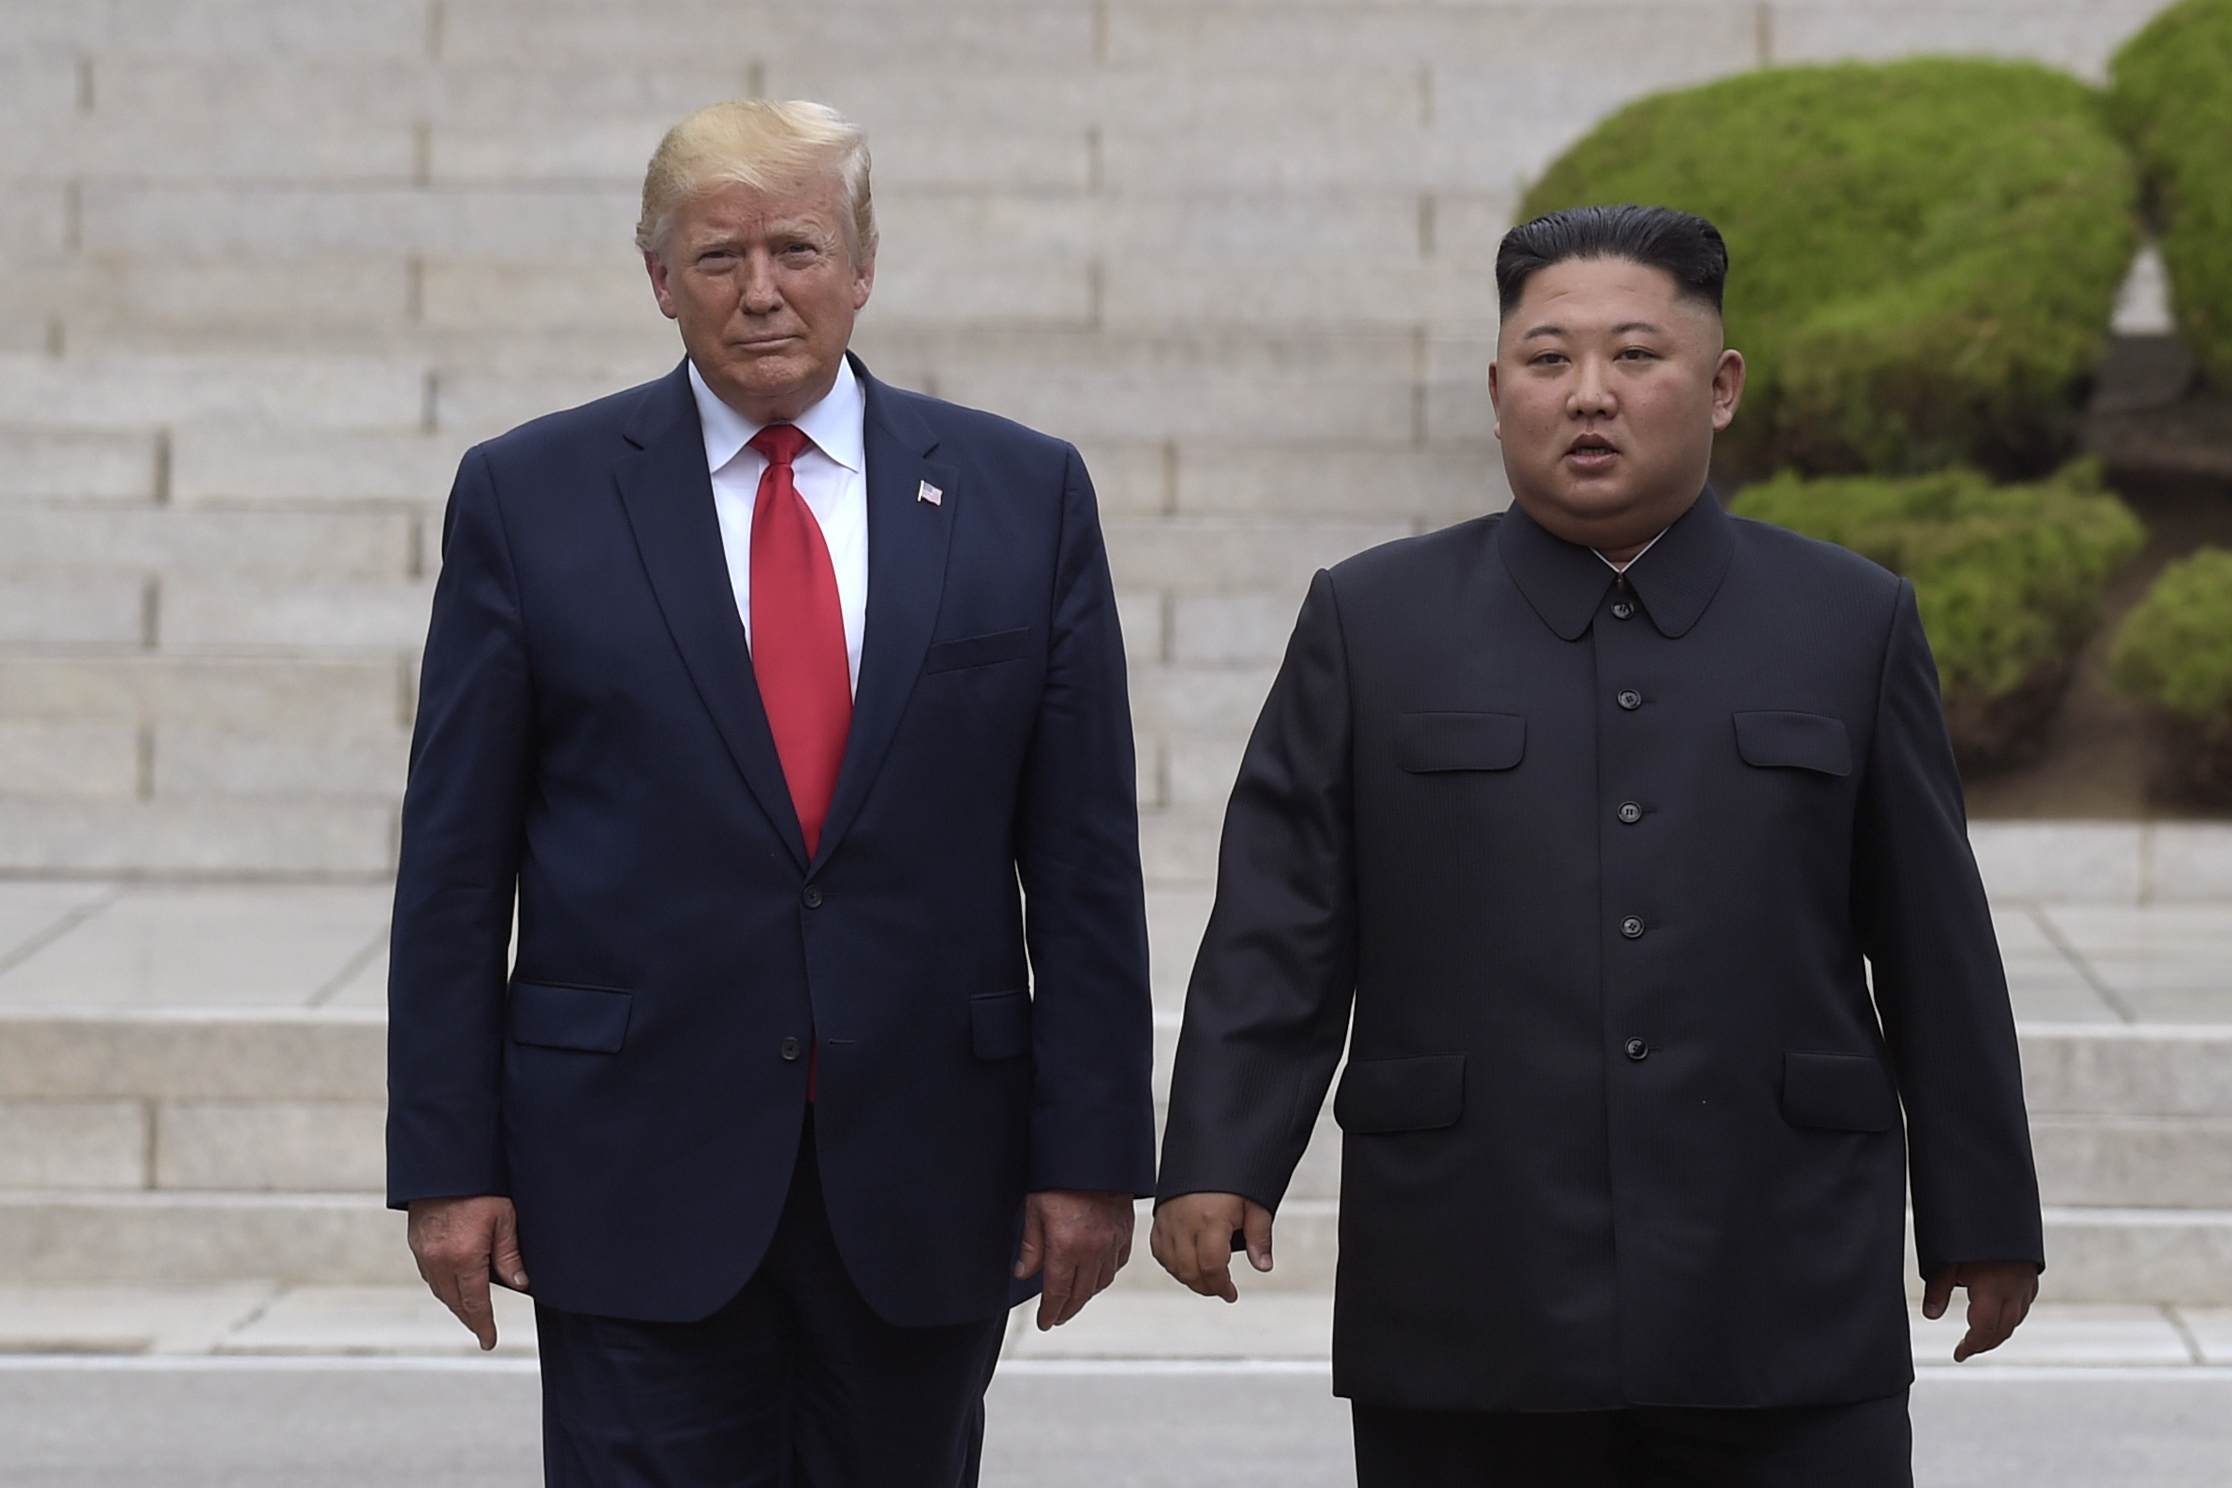 FILE - In this June 30, 2019, file photo, President Donald Trump, left, meets with North Korean leader Kim Jong Un at the North Korean side of the border at the village of Panmunjom in Demilitarized Zone. North Korea threatened Thursday, Dec. 5, to resume insults of Trump and consider him a “dotard” if he keeps using provocative language. (AP Photo/Susan Walsh, File)